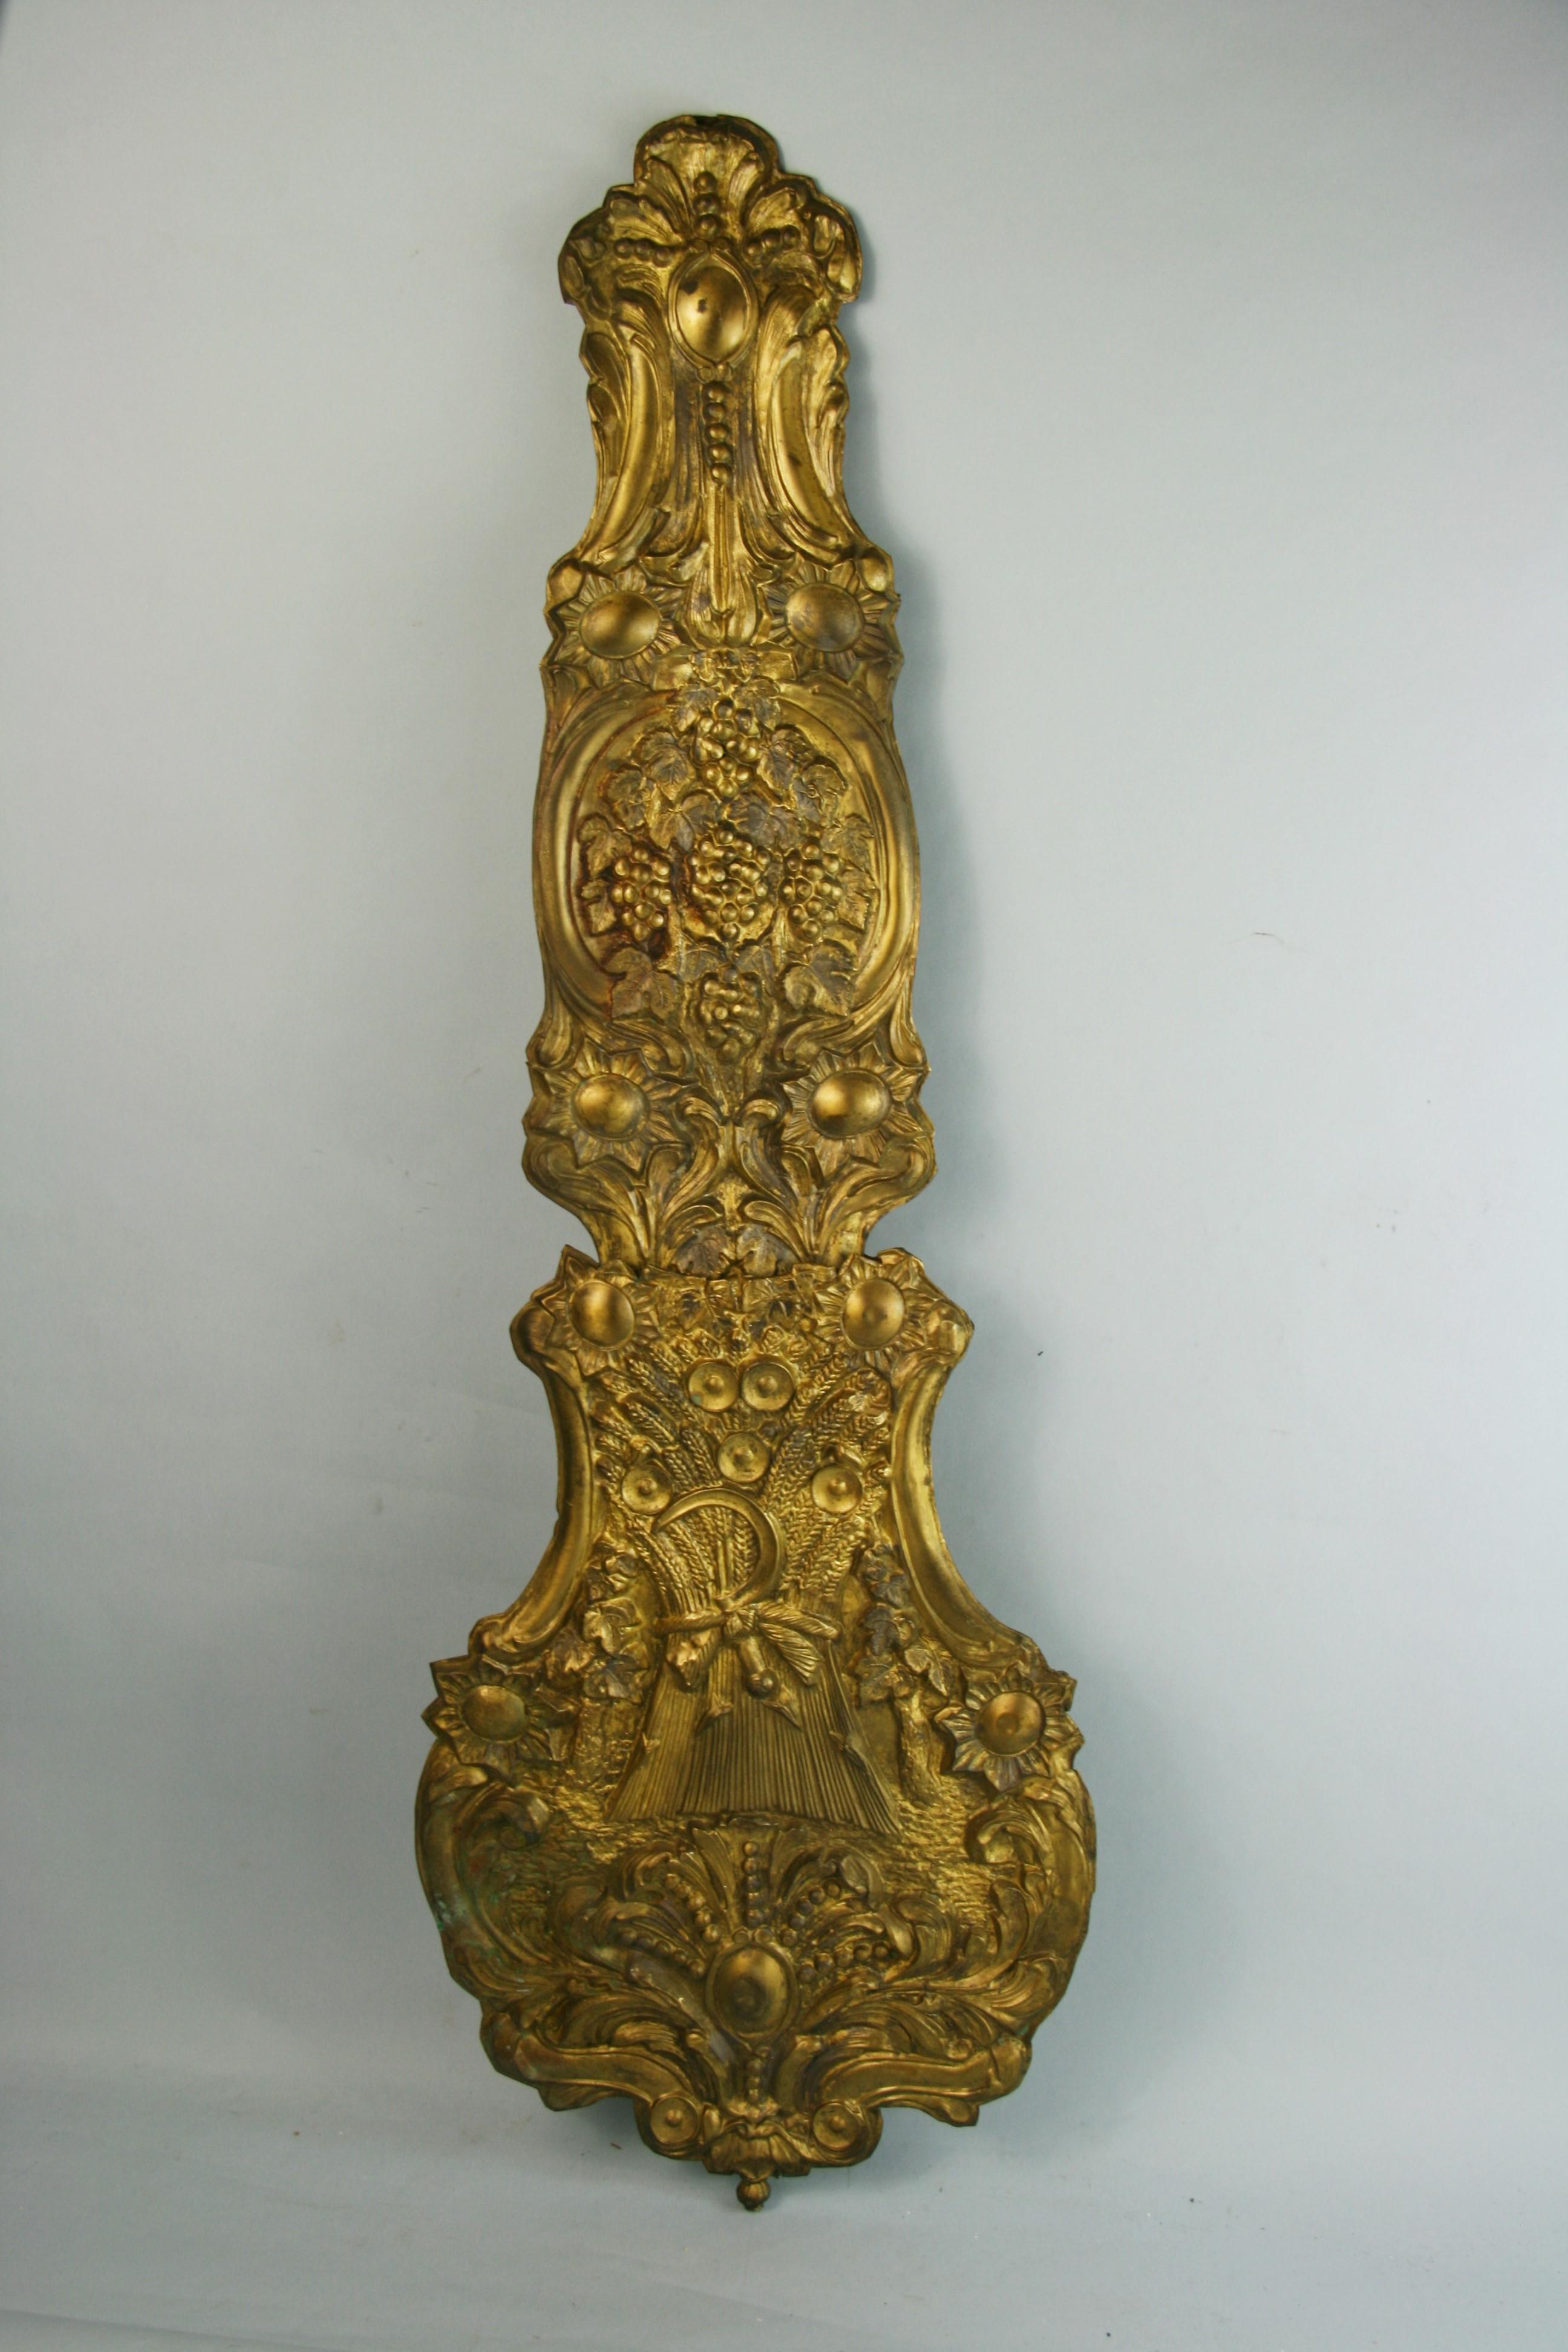 3-677 French brass embossed architectural element.
Has matching clock face see 3-676